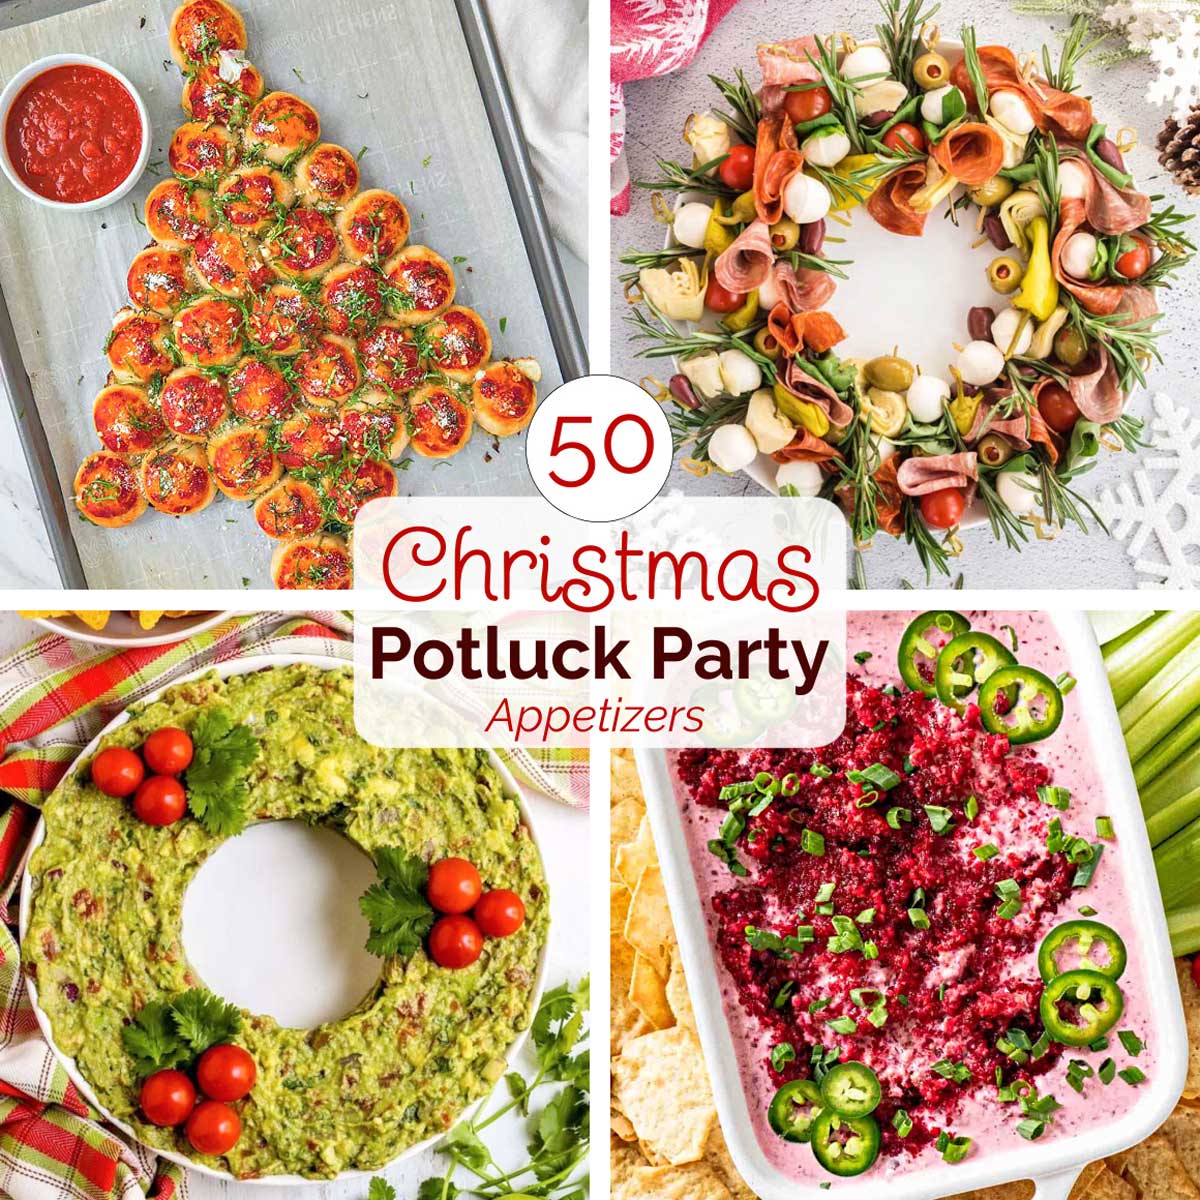 Square collage of 4 recipes with text reading Collage of 4 recipe photos with text overlay "50 Christmas Potluck Party Appetizers".